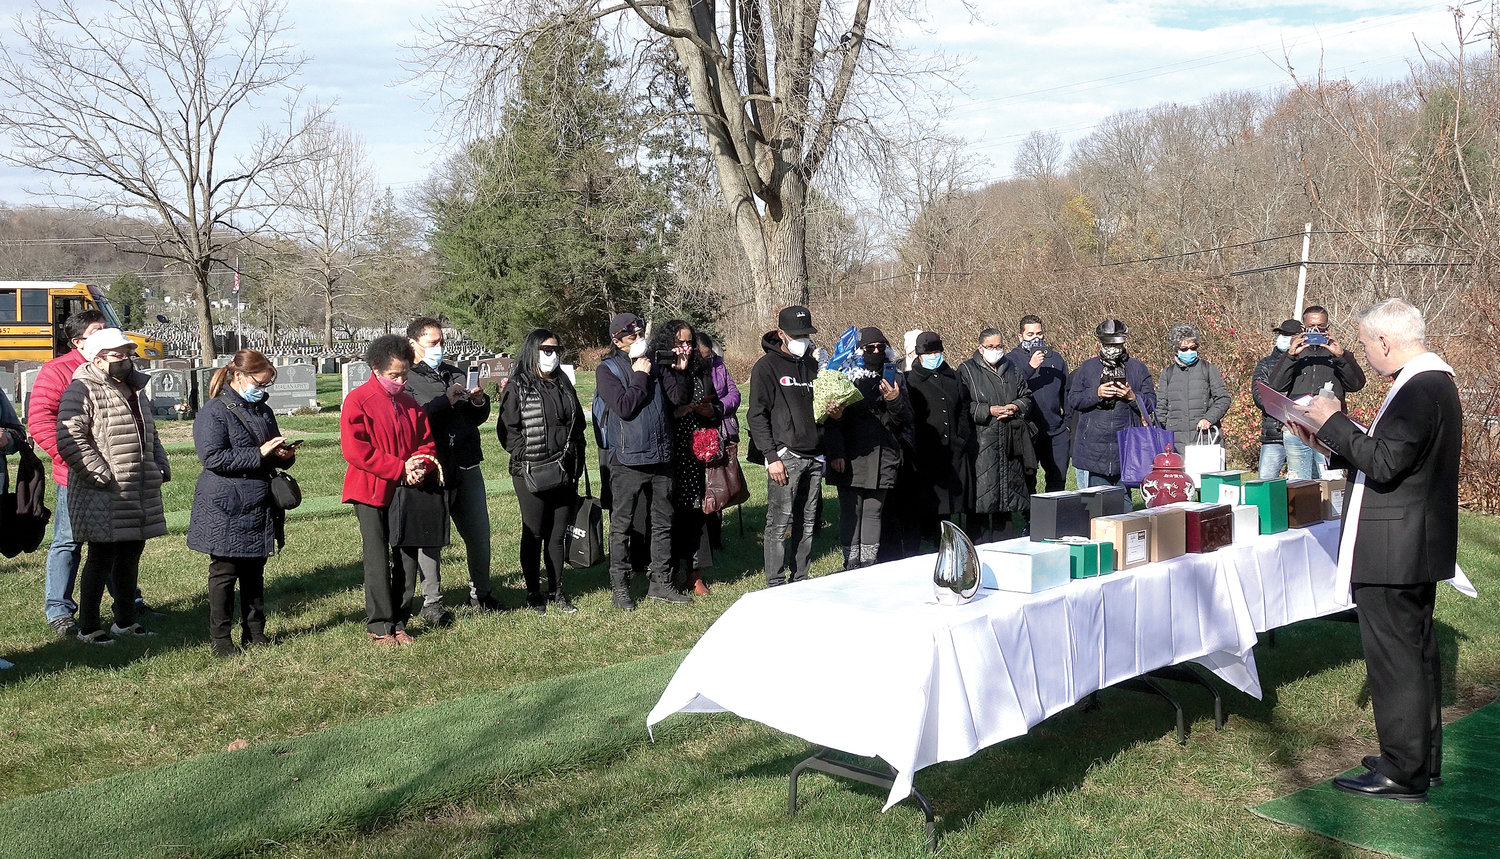 Father Daniel Kearney, pastor of Ascension parish in Manhattan, leads family and friends in prayer before the cremated remains of 18 people with parish ties were interred in the St. Joseph of Arimathea section of Gate of Heaven Cemetery in Hawthorne Nov. 21.